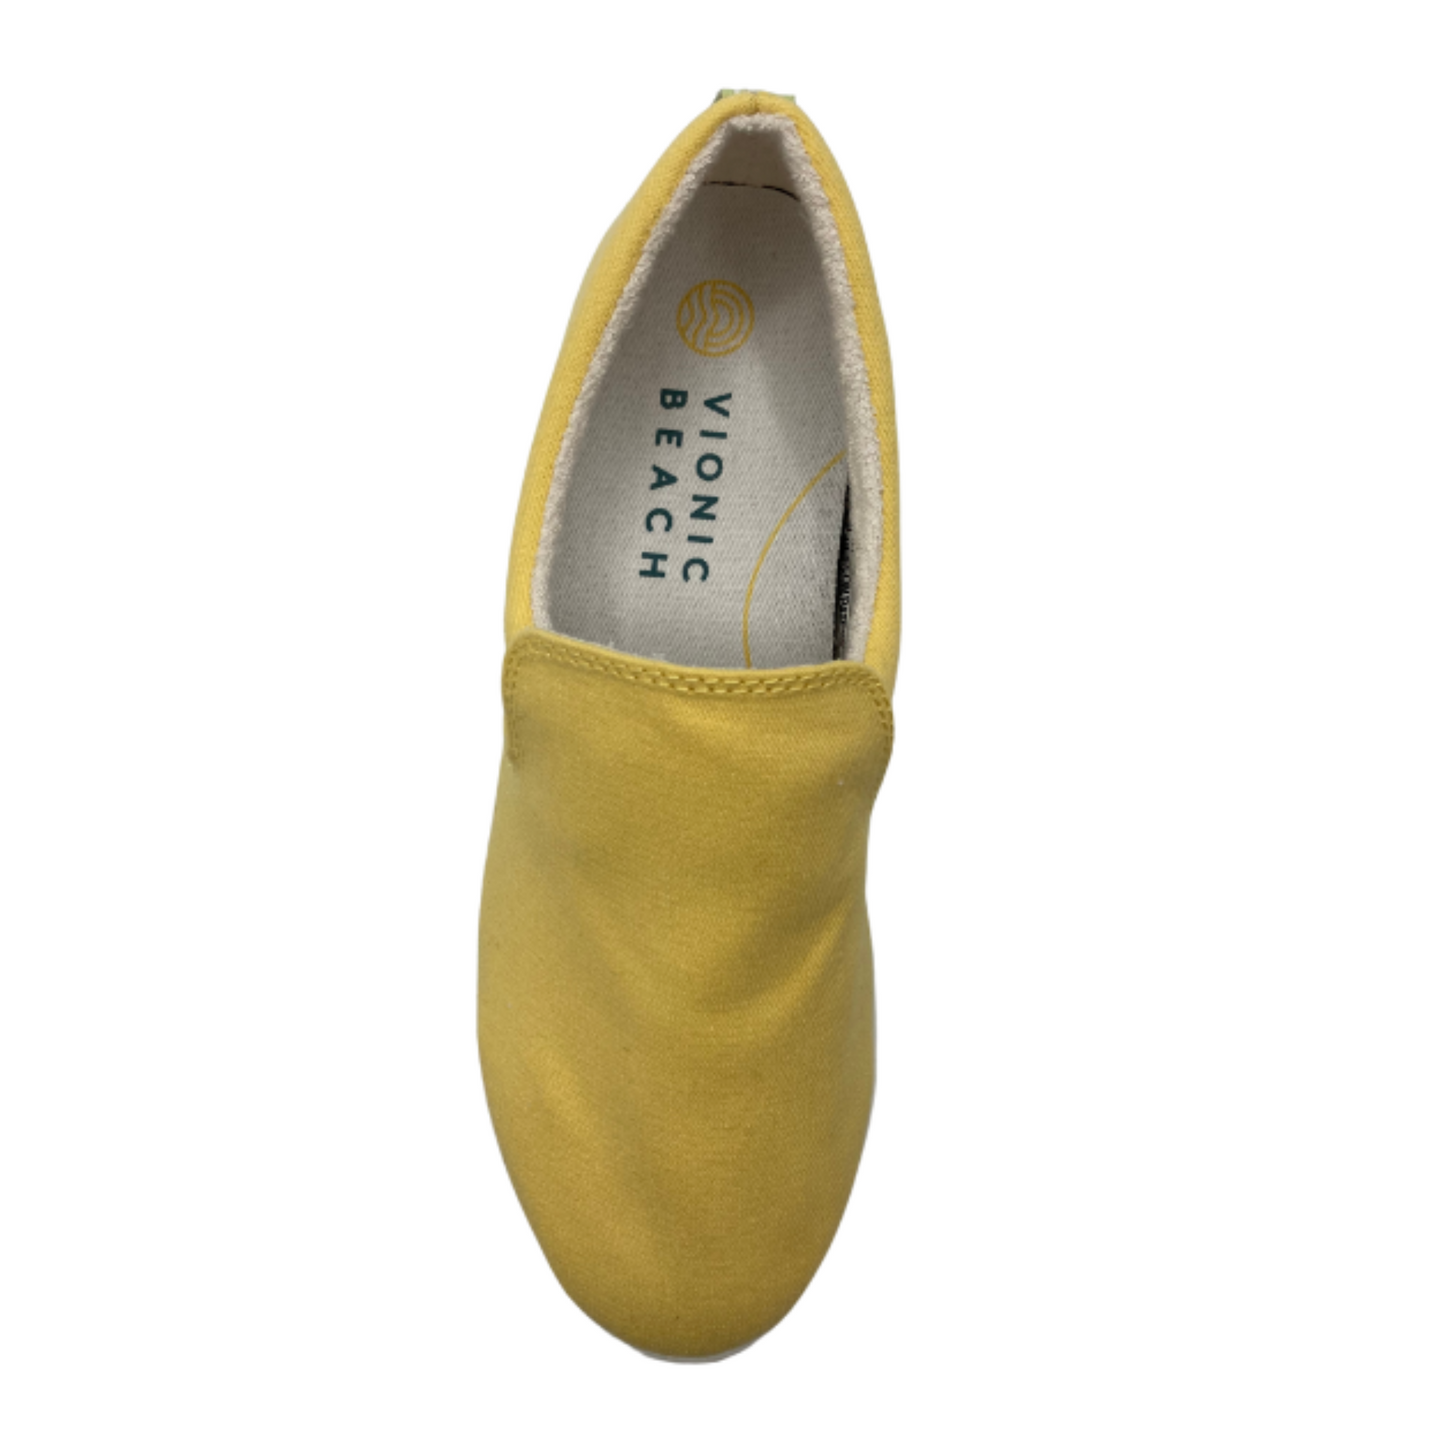 A top view of a yellow slip-on sneaker with a white outsole.